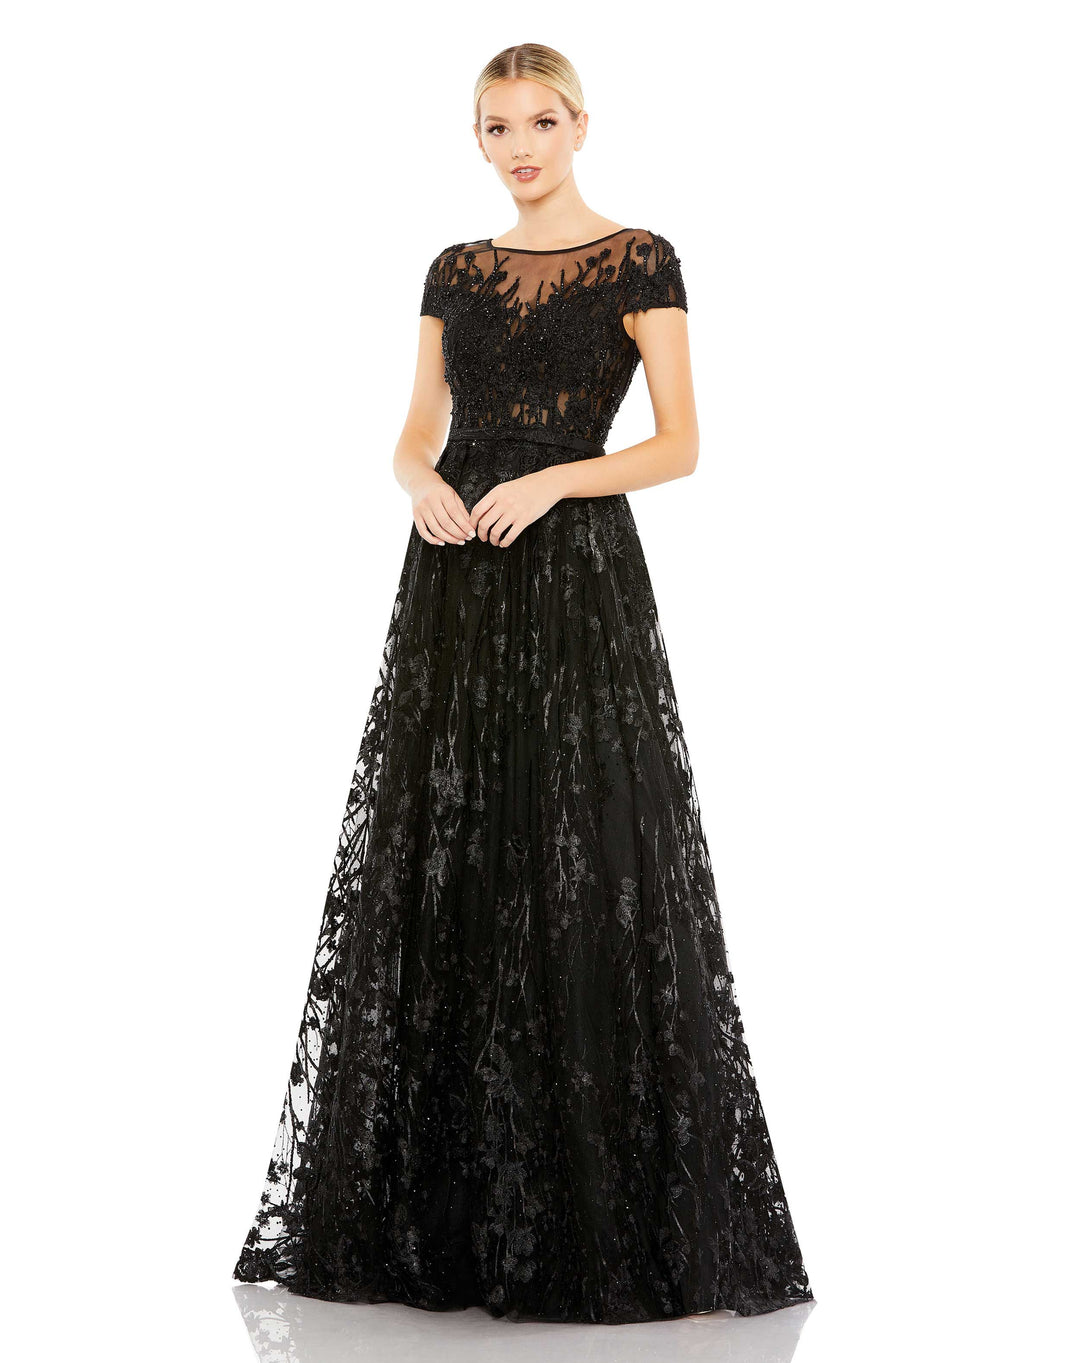 Embellished Floral Cap Sleeeve A Line Gown – Mac Duggal